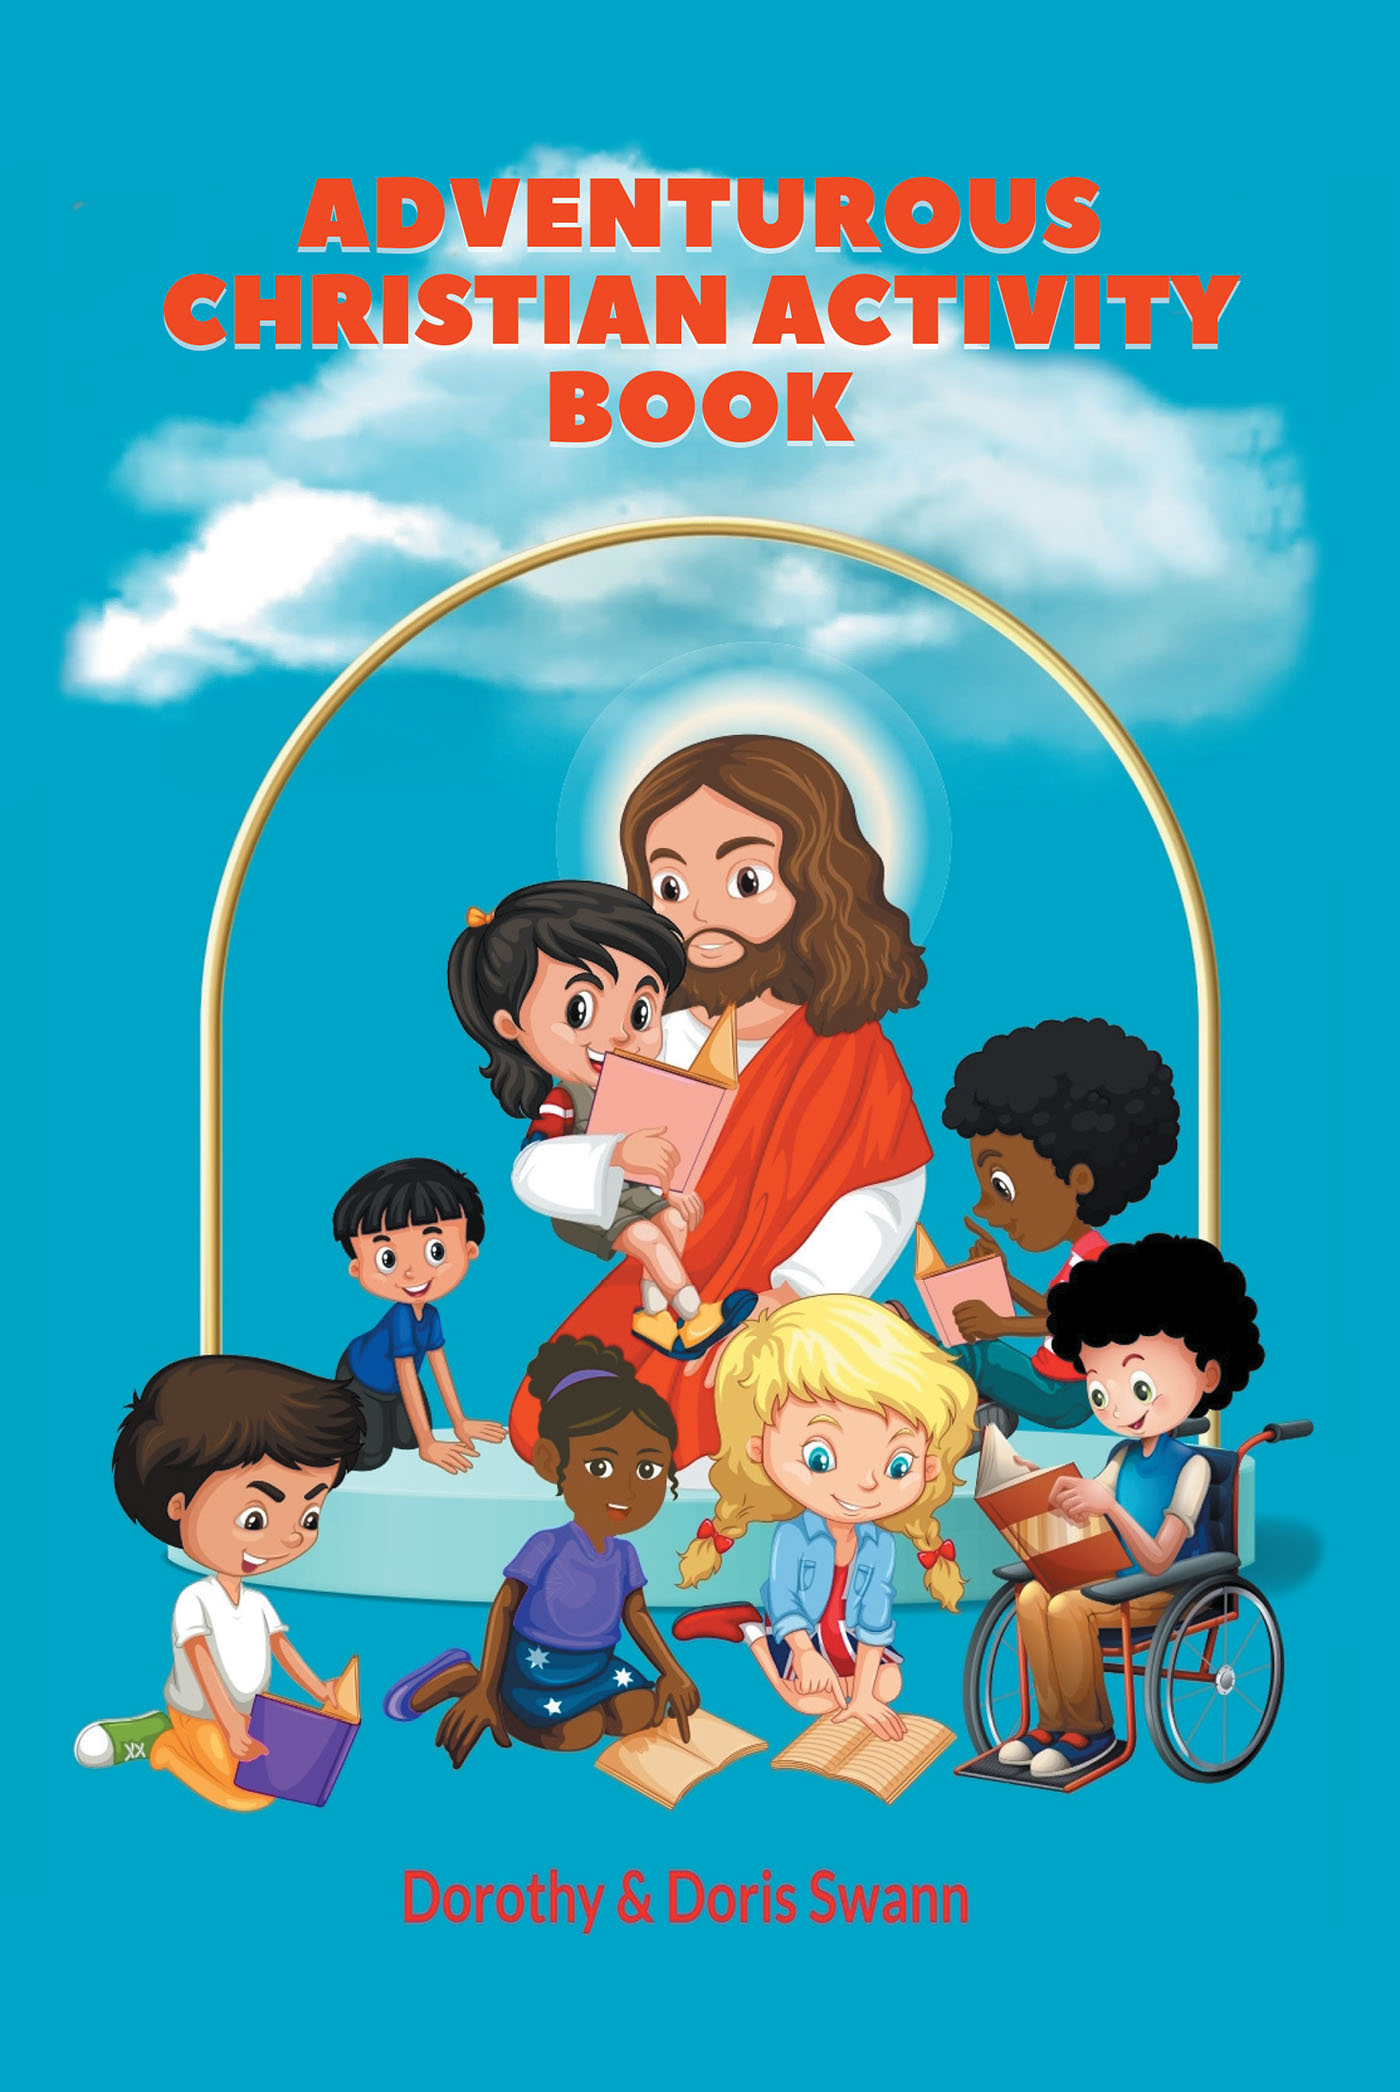 Dorothy and Doris Swann’s Newly Released "Adventurous Christian Activity Book" is a Fun Collection of Interactive Activities Meant to Stimulate the Mind